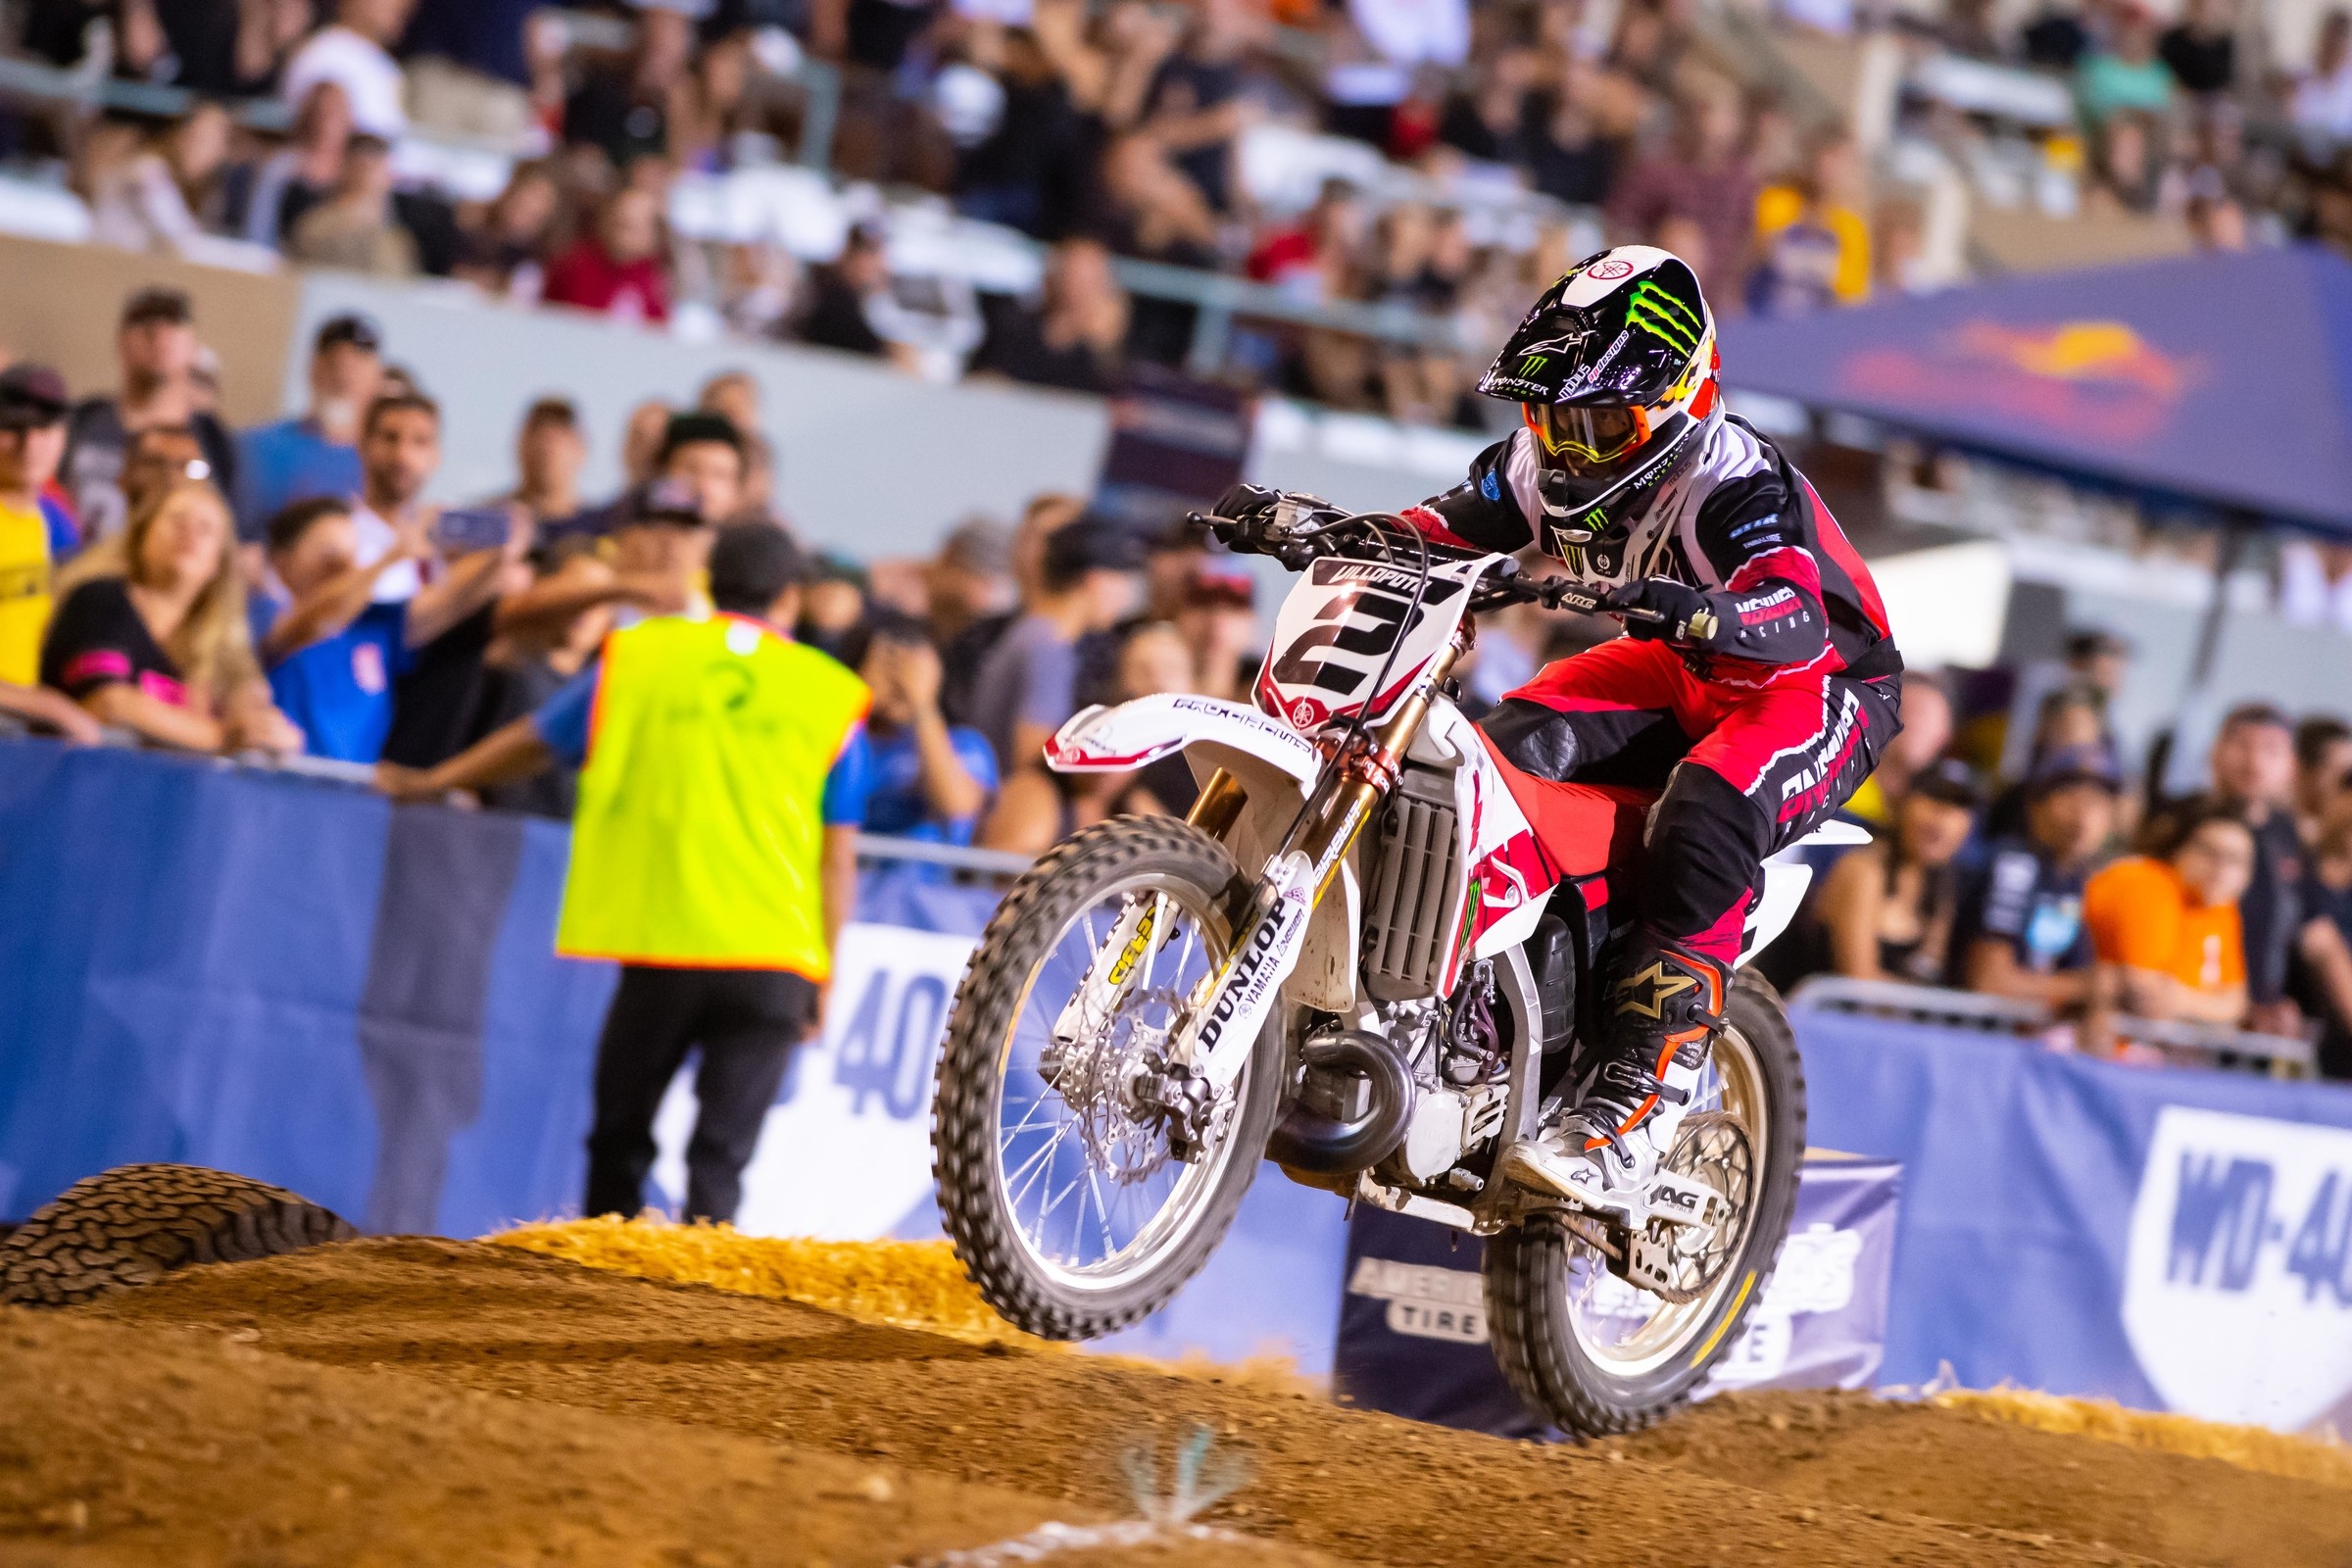 How to Watch 2019 Red Bull Straight Rhythm